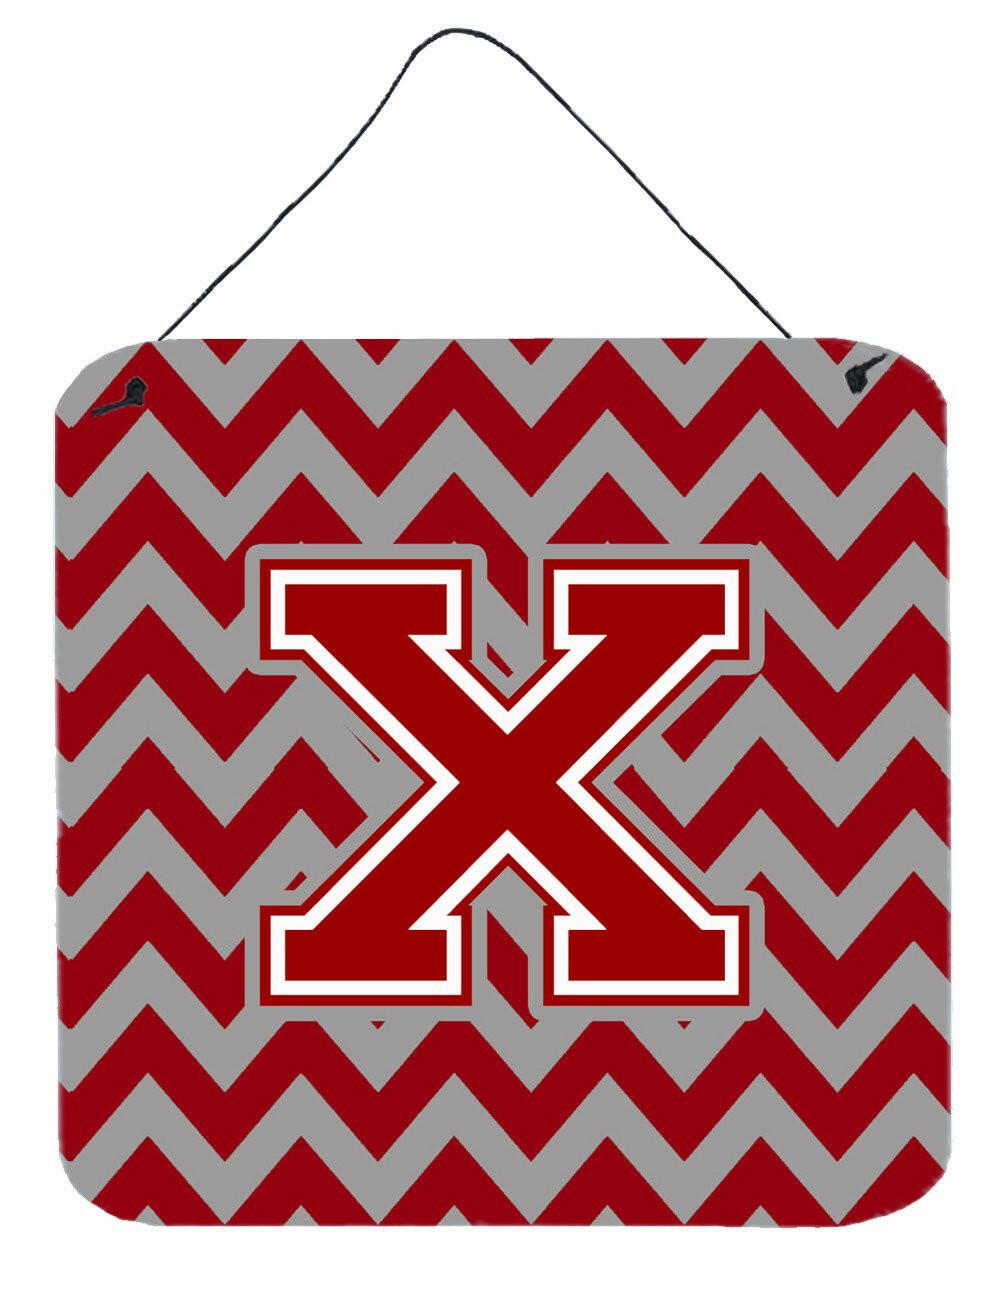 Letter X Chevron Maroon and White Wall or Door Hanging Prints CJ1049-XDS66 by Caroline's Treasures